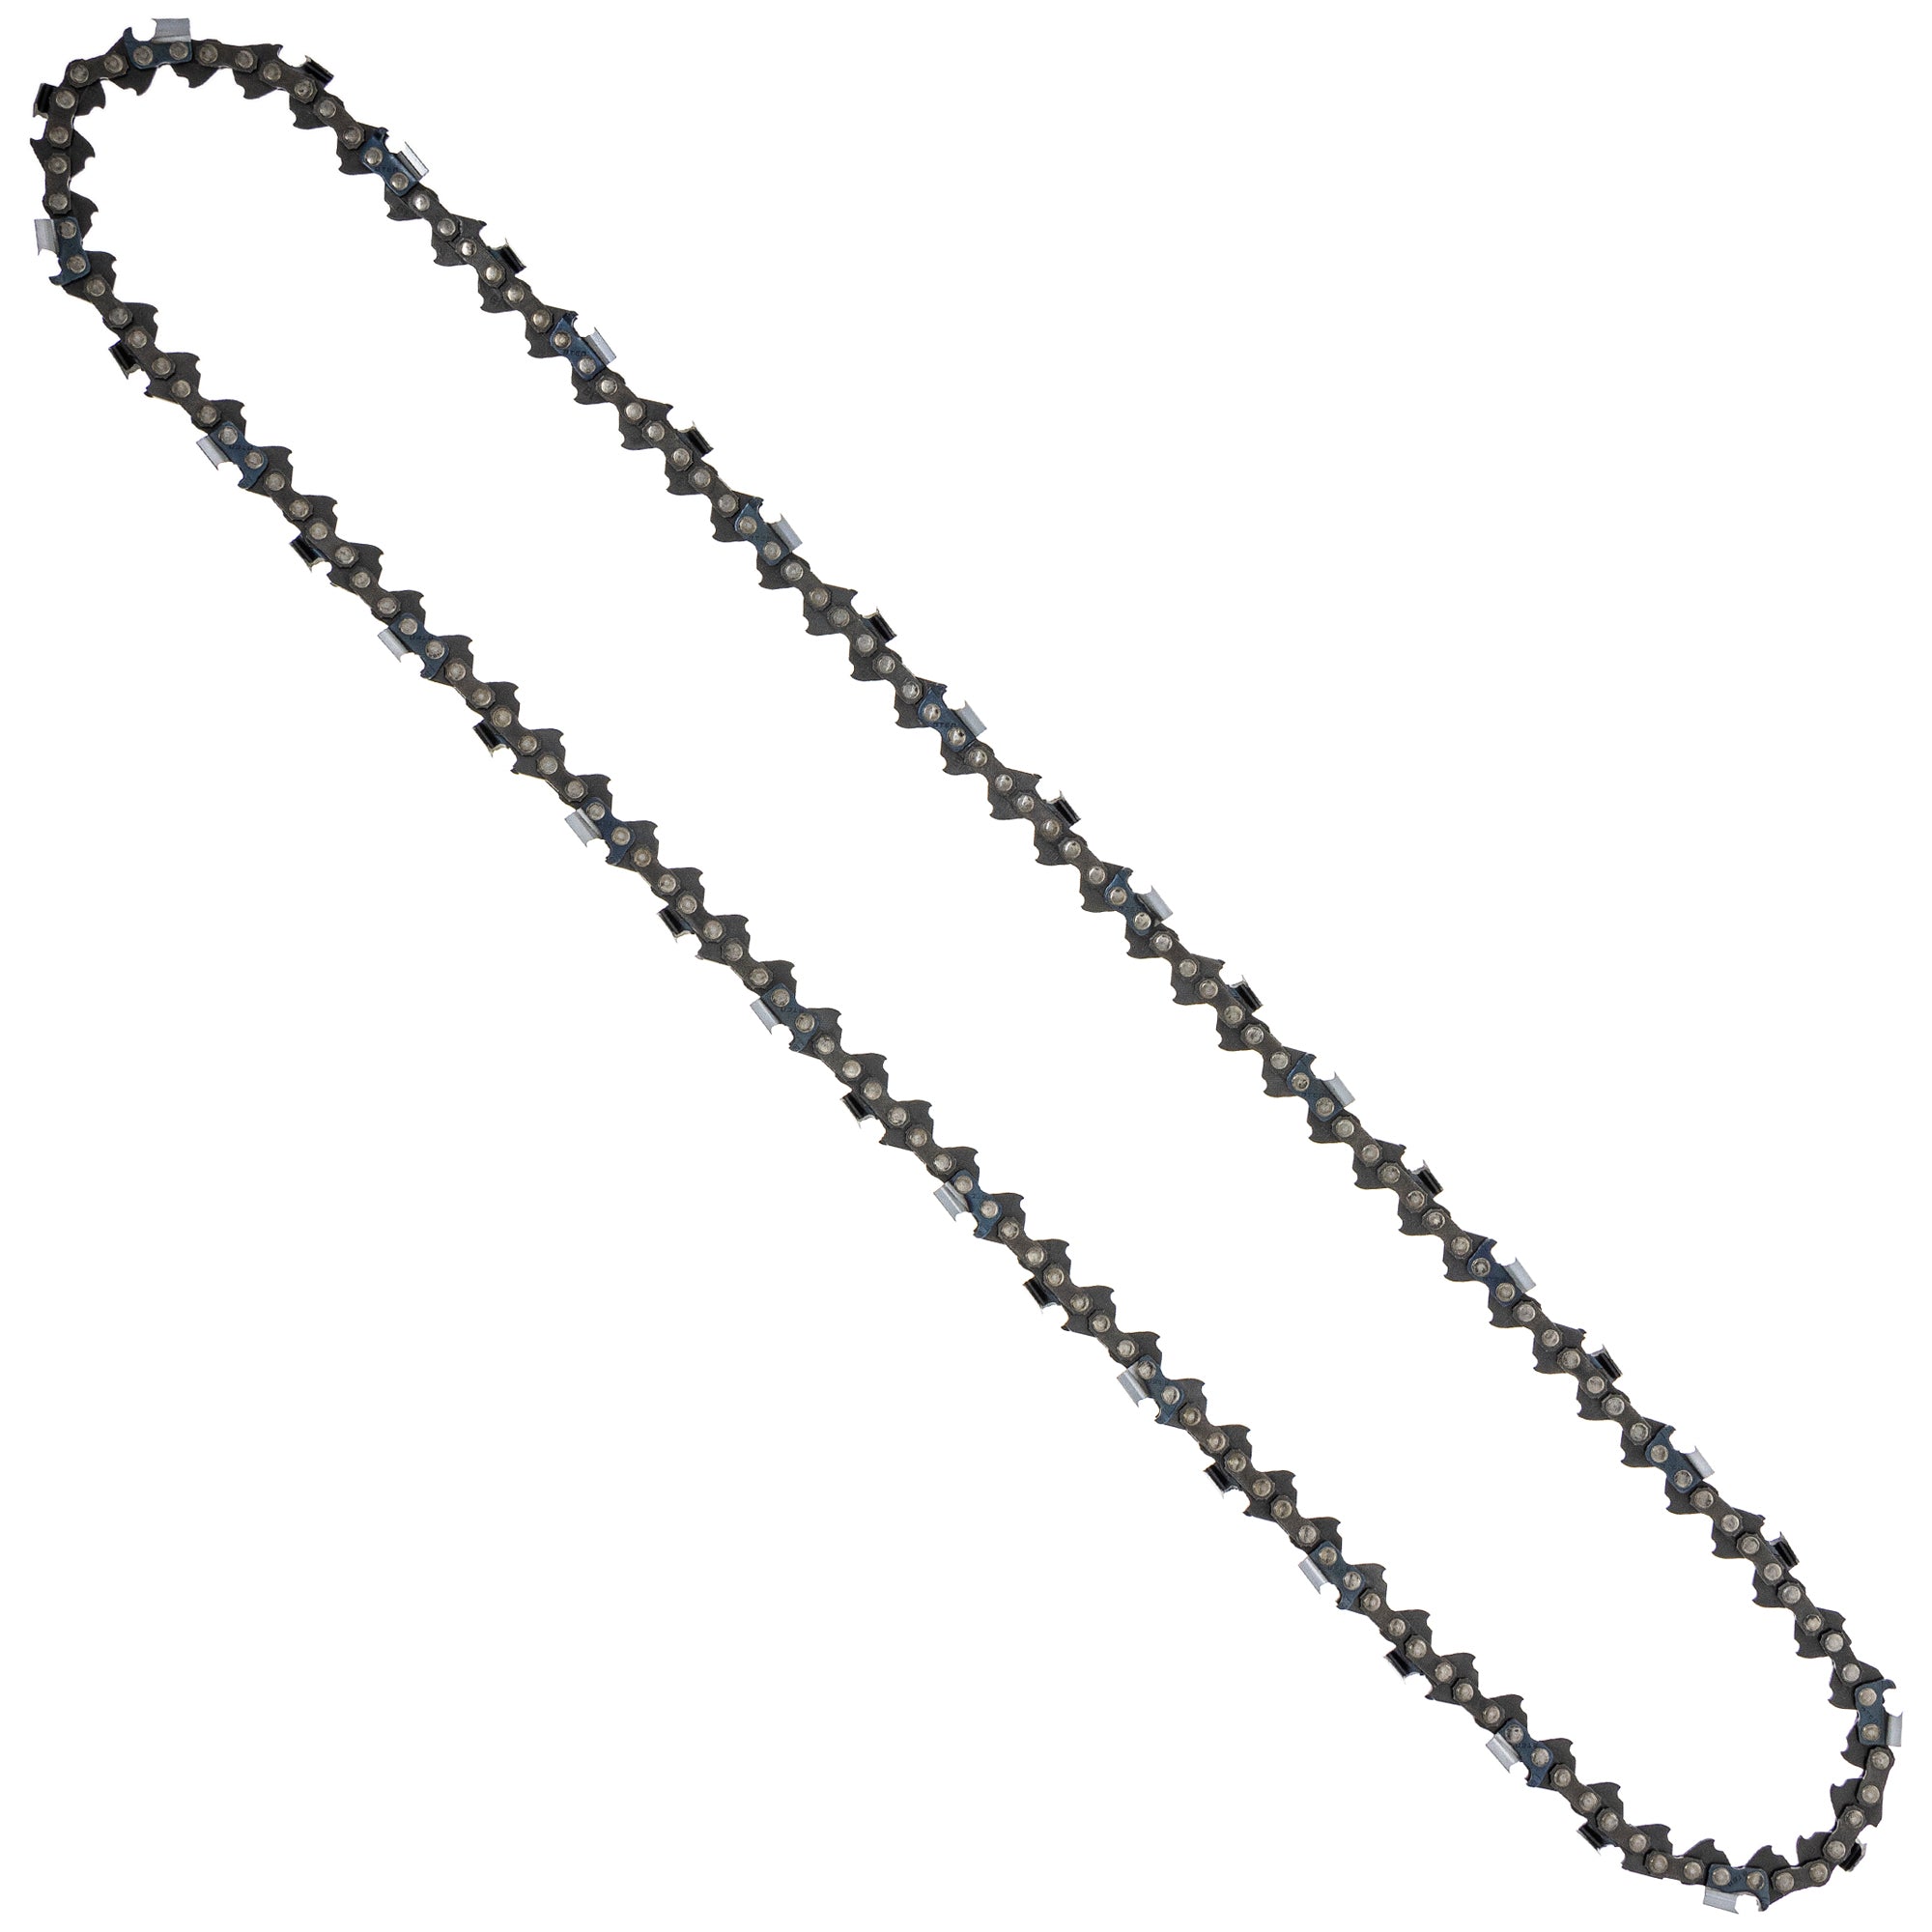 8TEN 810-CCC2310H Chain 10-Pack for zOTHER Oregon MS 634 30 040